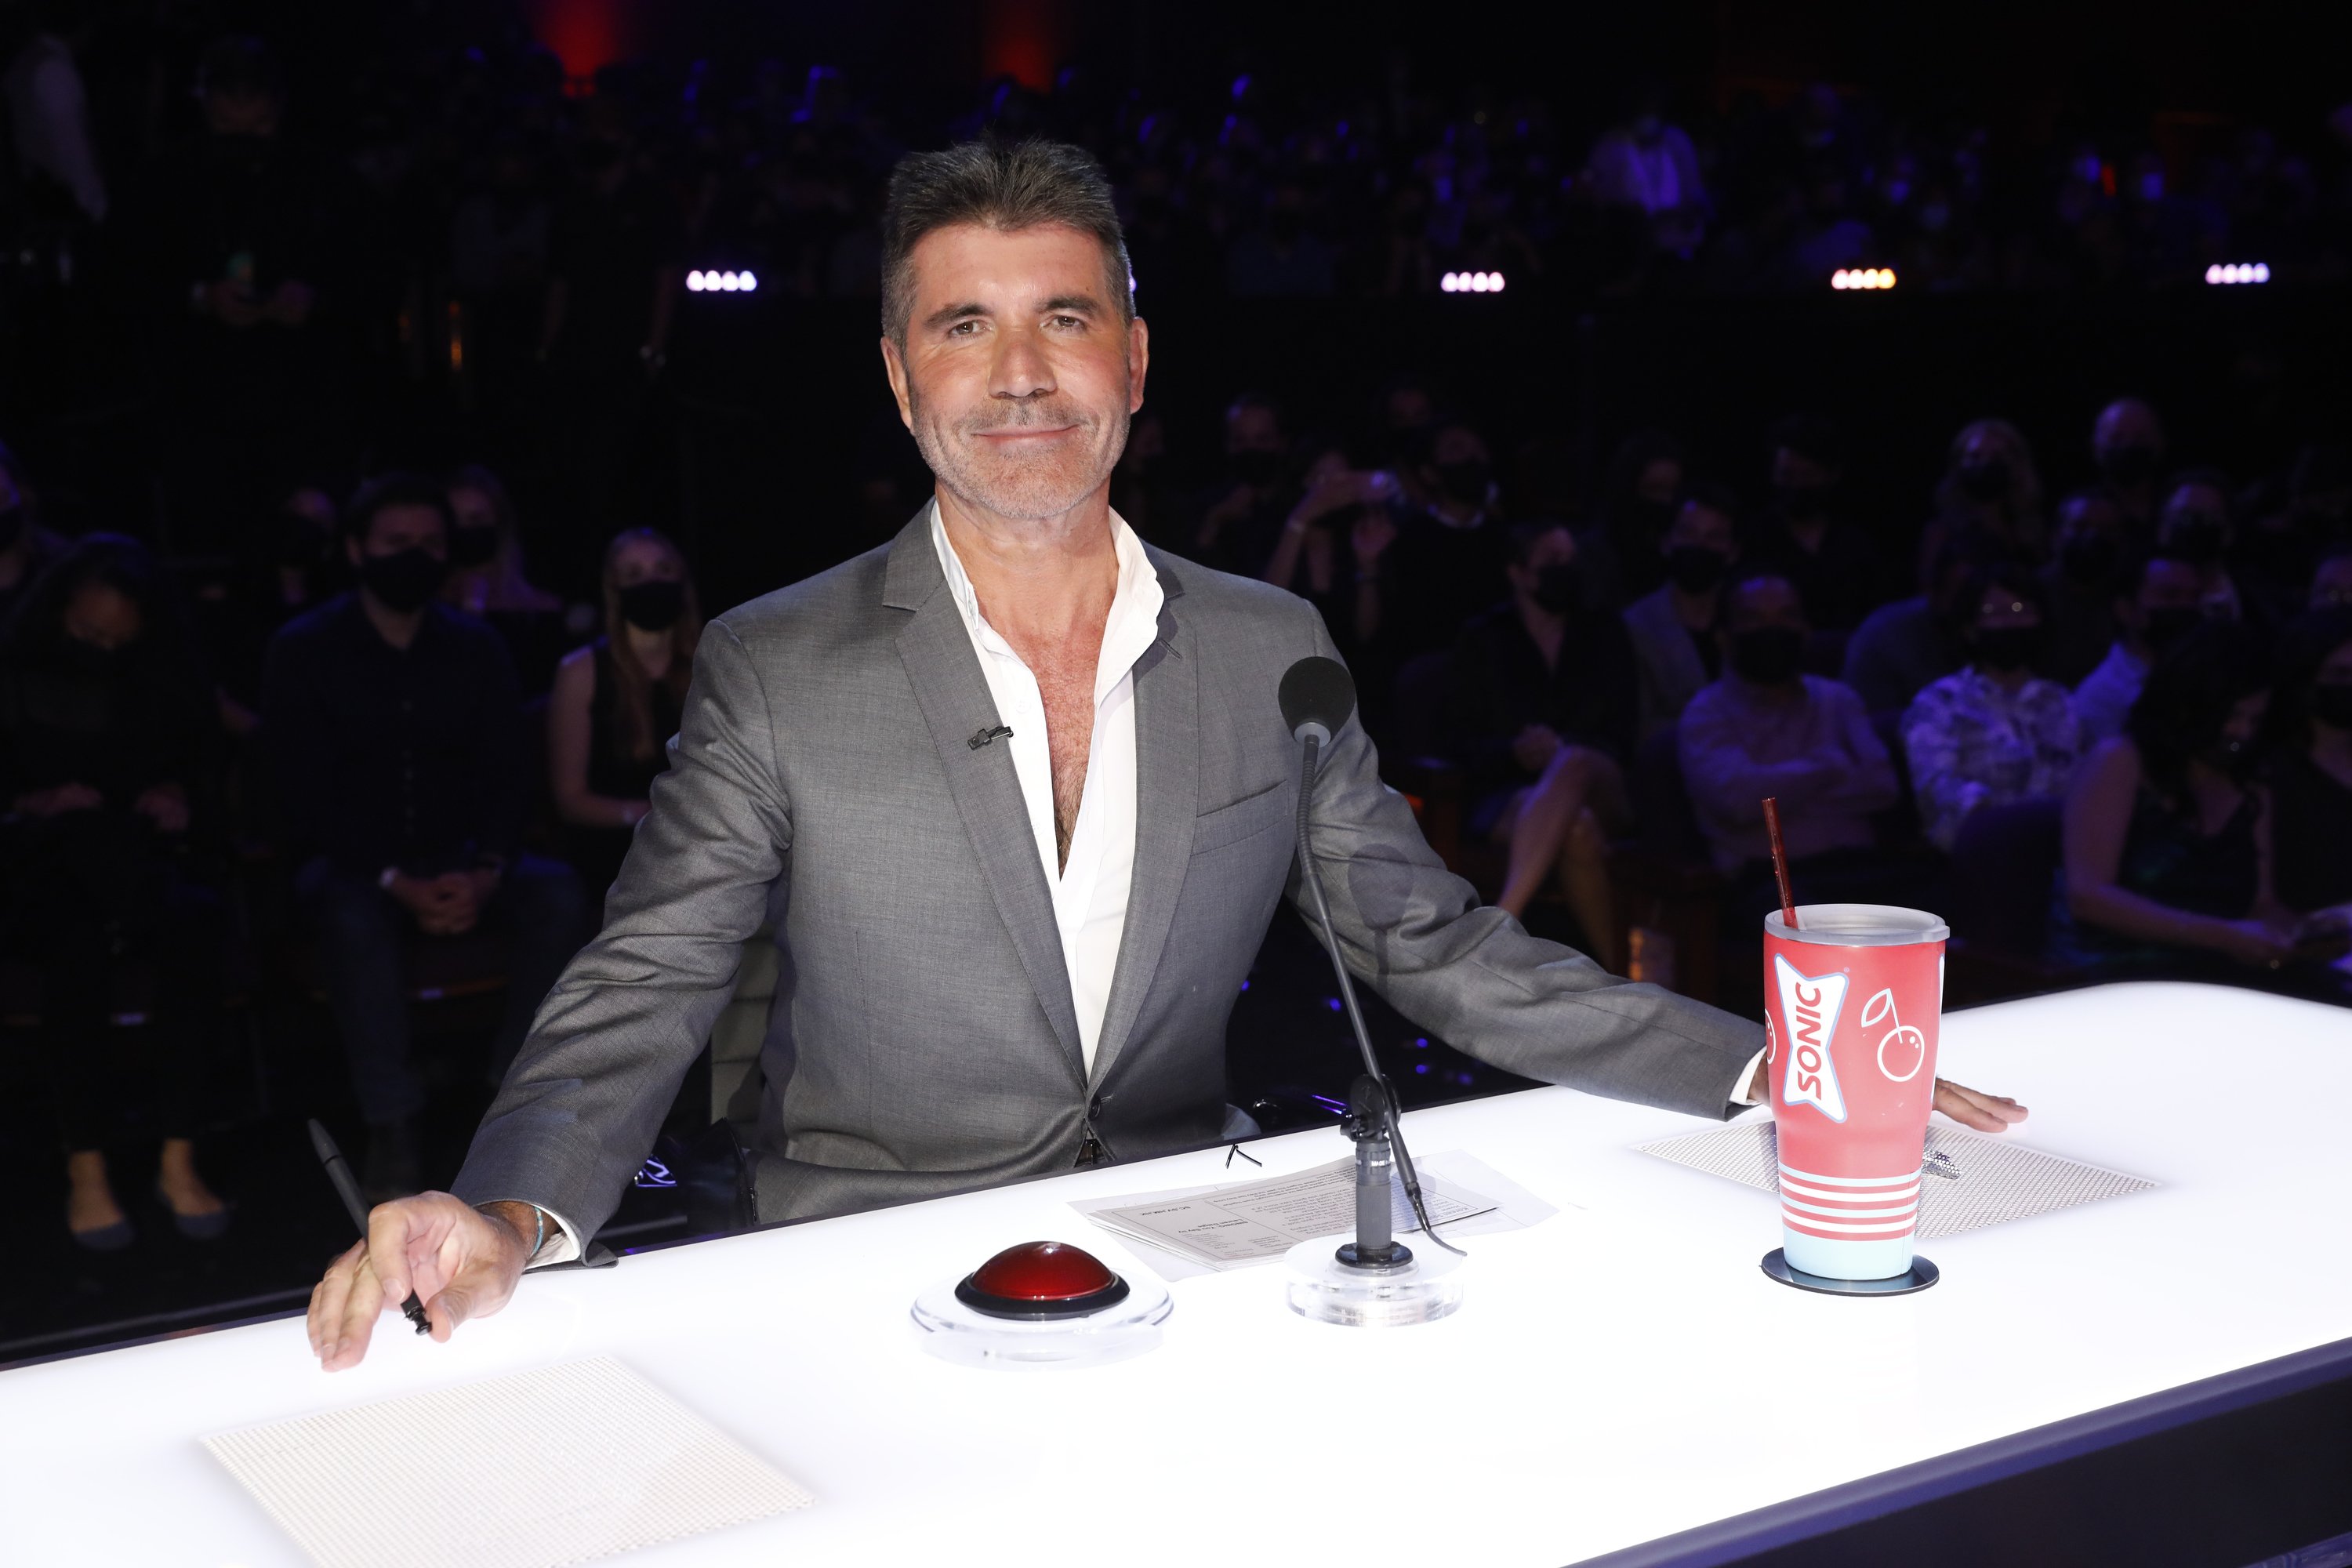 Simon Cowell sits as a judge for the 16th season of "America's Got Talent." | Source: Getty Images